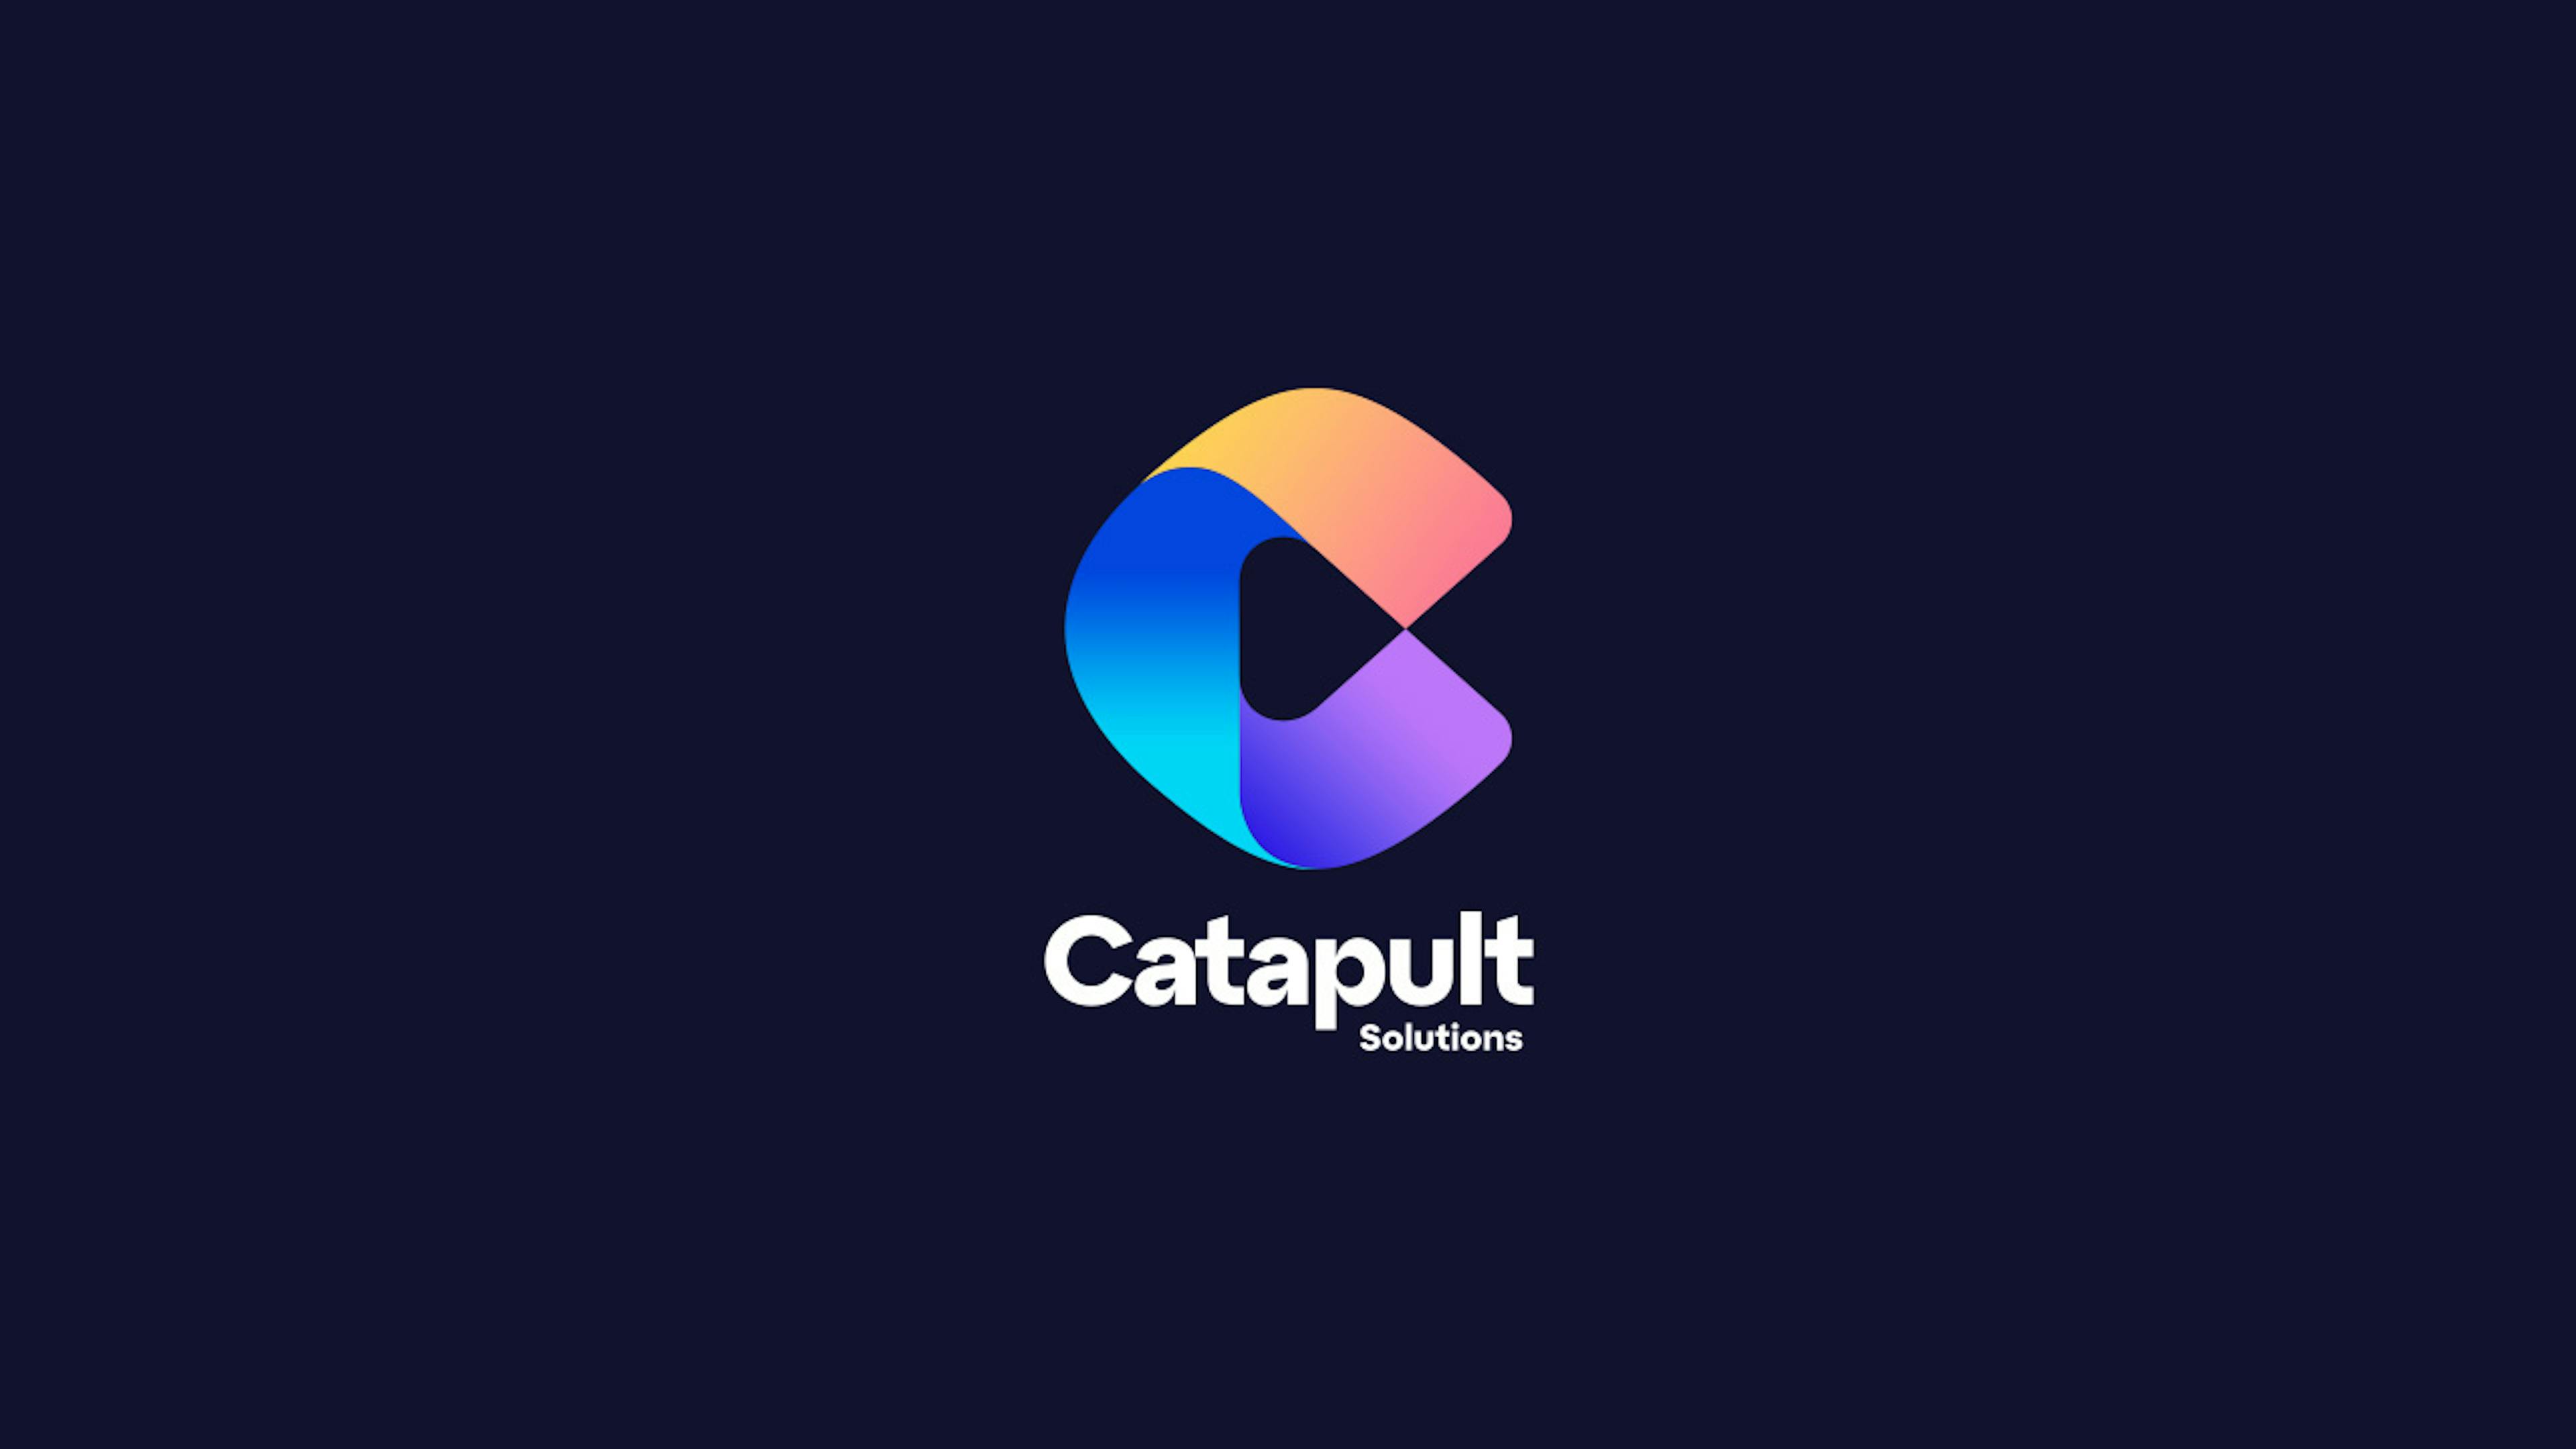 Catapult solutions group logo that has a rainbow gradient in a big C